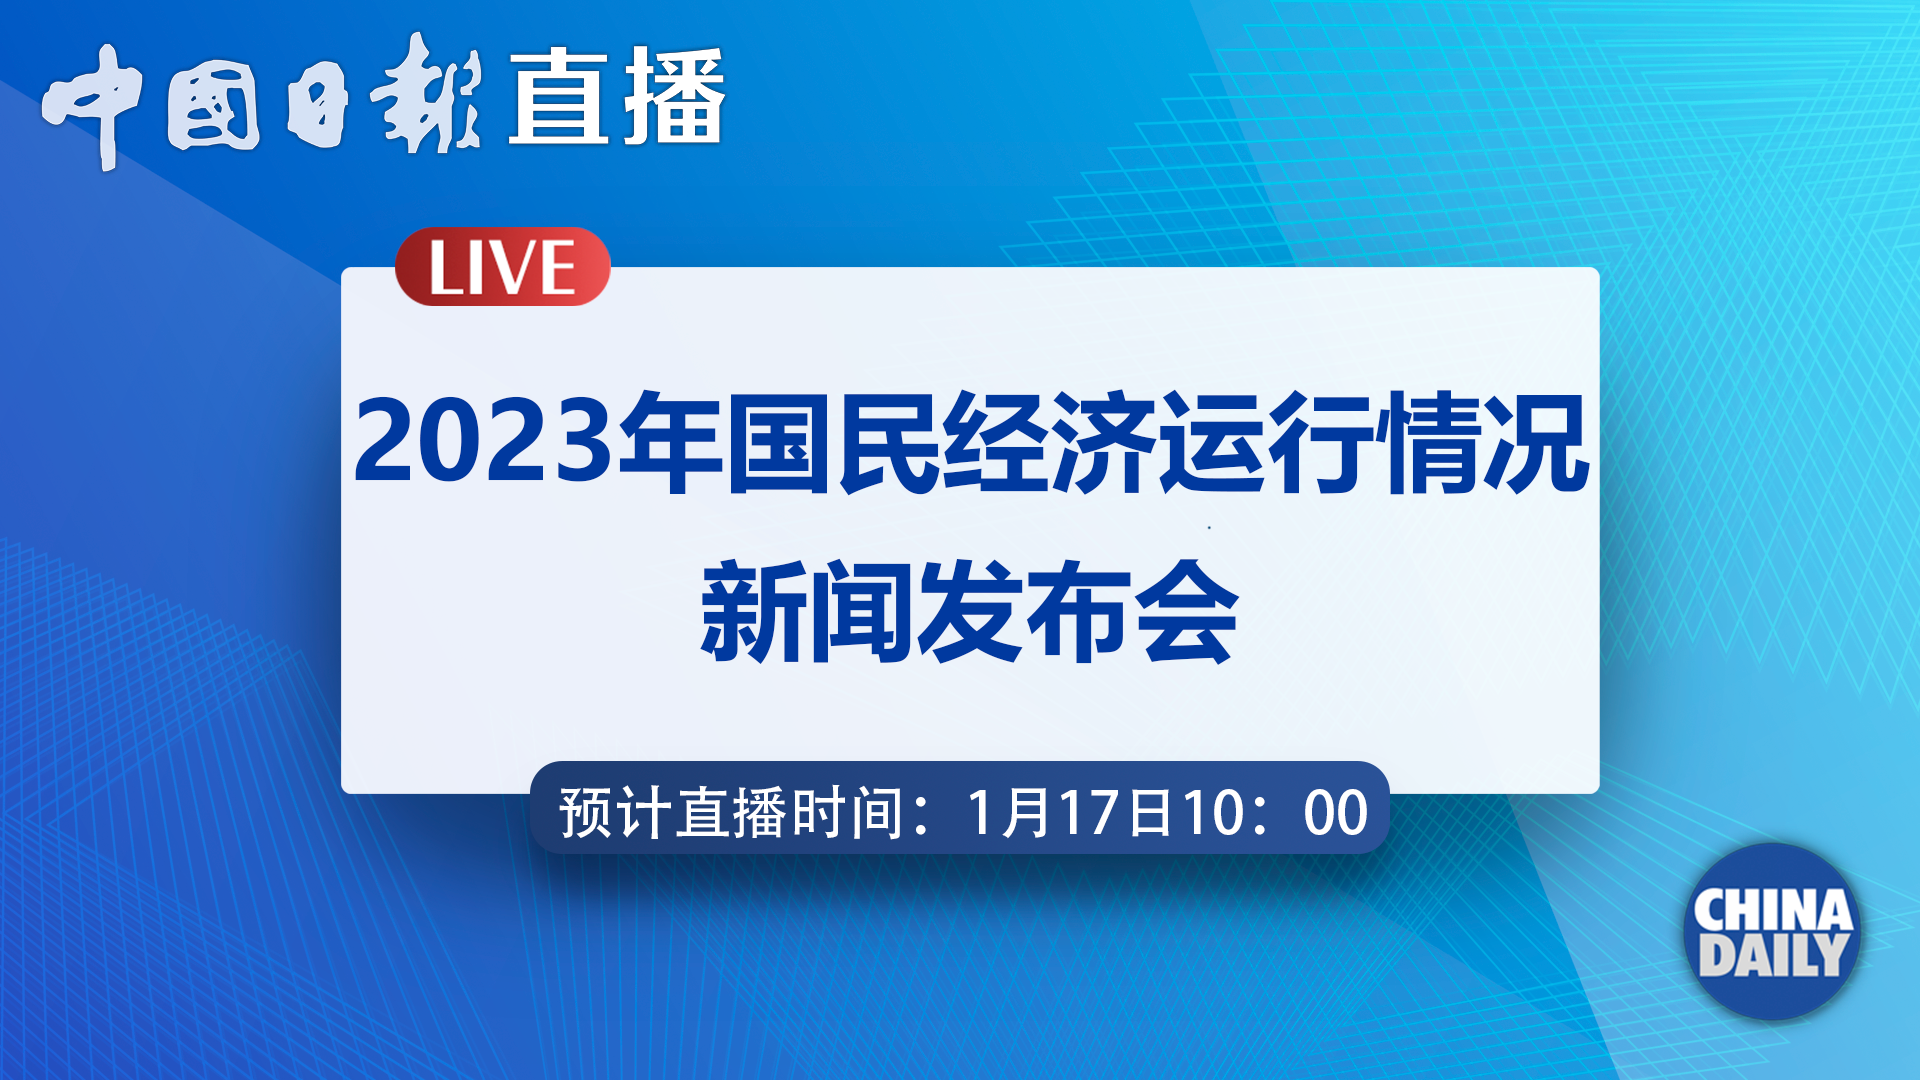 Watch it again: News conference on 2023 national economic performance